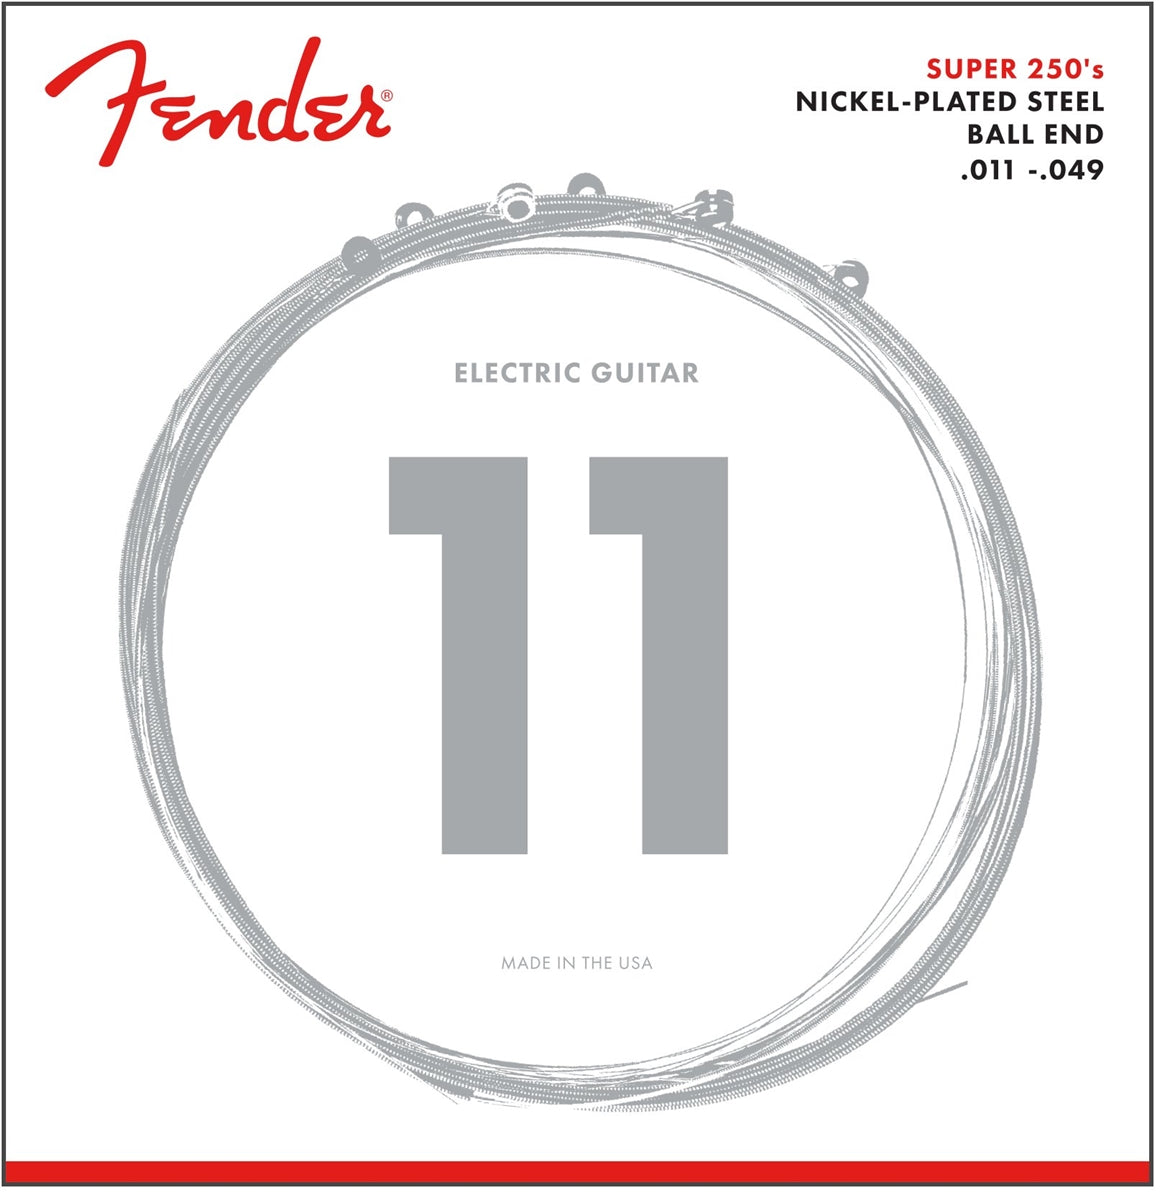 Fender Super 250 High Performance Nickel-Plated Acoustic Electric Steel Guitar String Set with Ball Ends for Musicians (250XS, 250L, 250R and 250M)